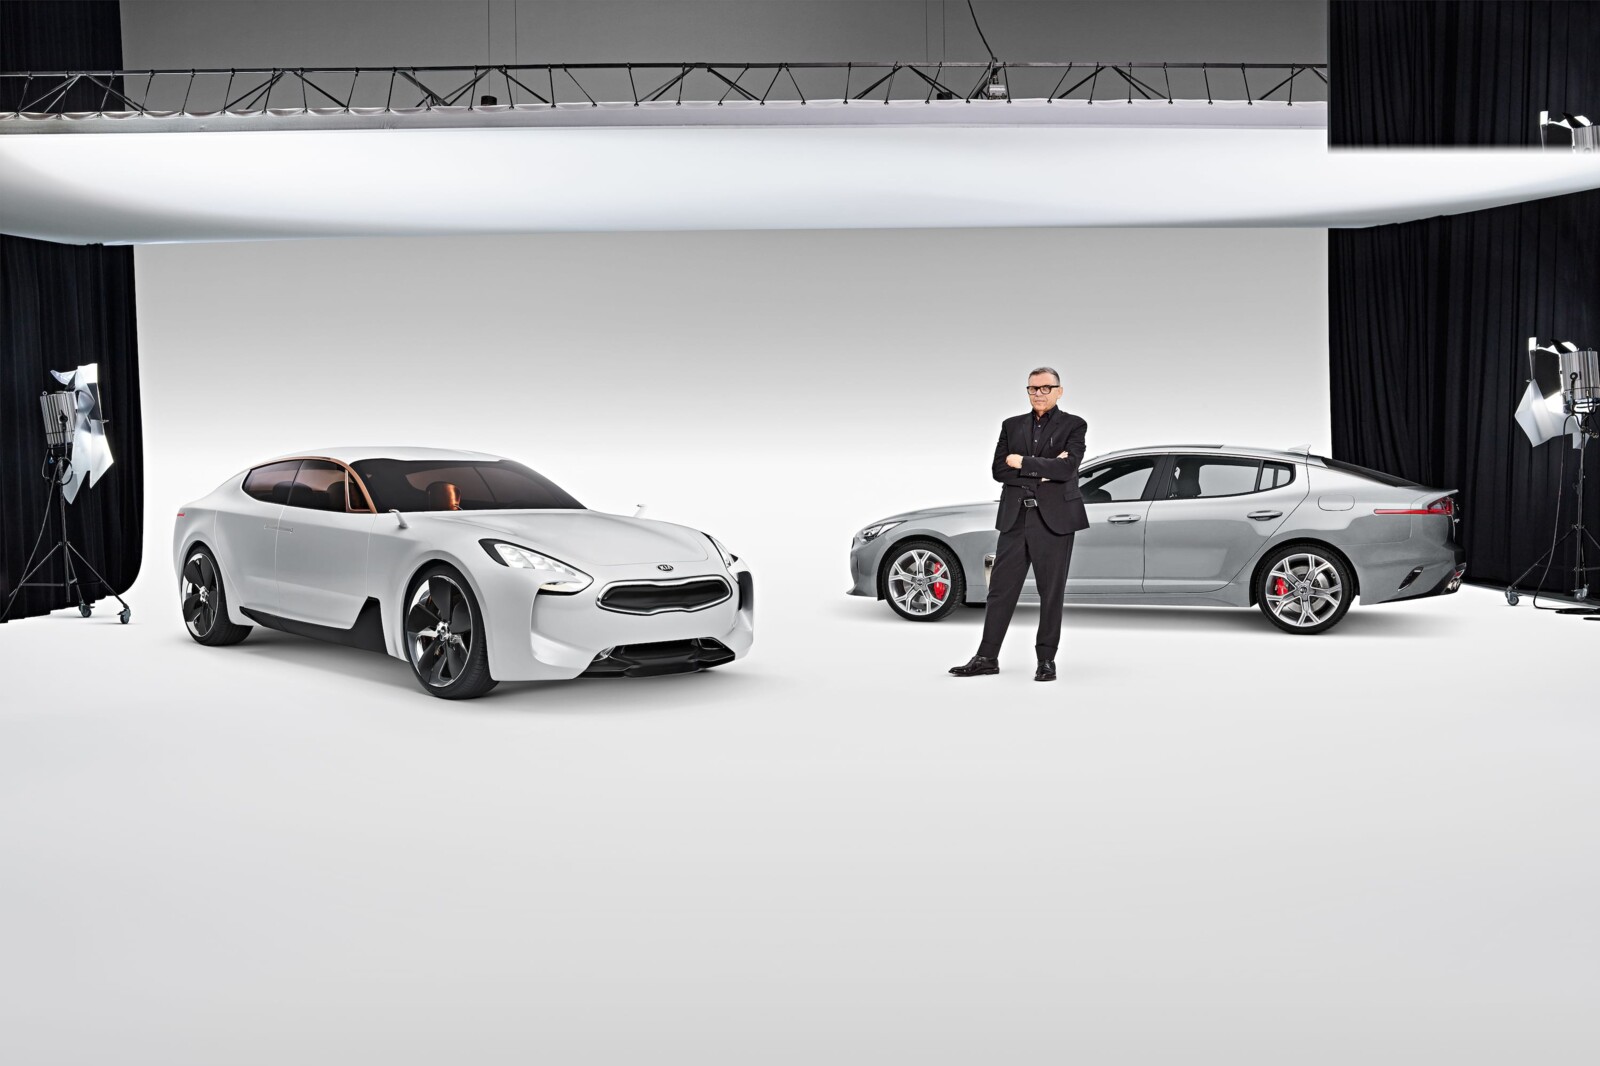 A project of love. Work on the Kia Stinger (right) began with the Kia GT Concept (left) in 2011. With its transaxle drive concept and fastback design, it was a very atypical promise from the Korean brand that was finally delivered in 2017.